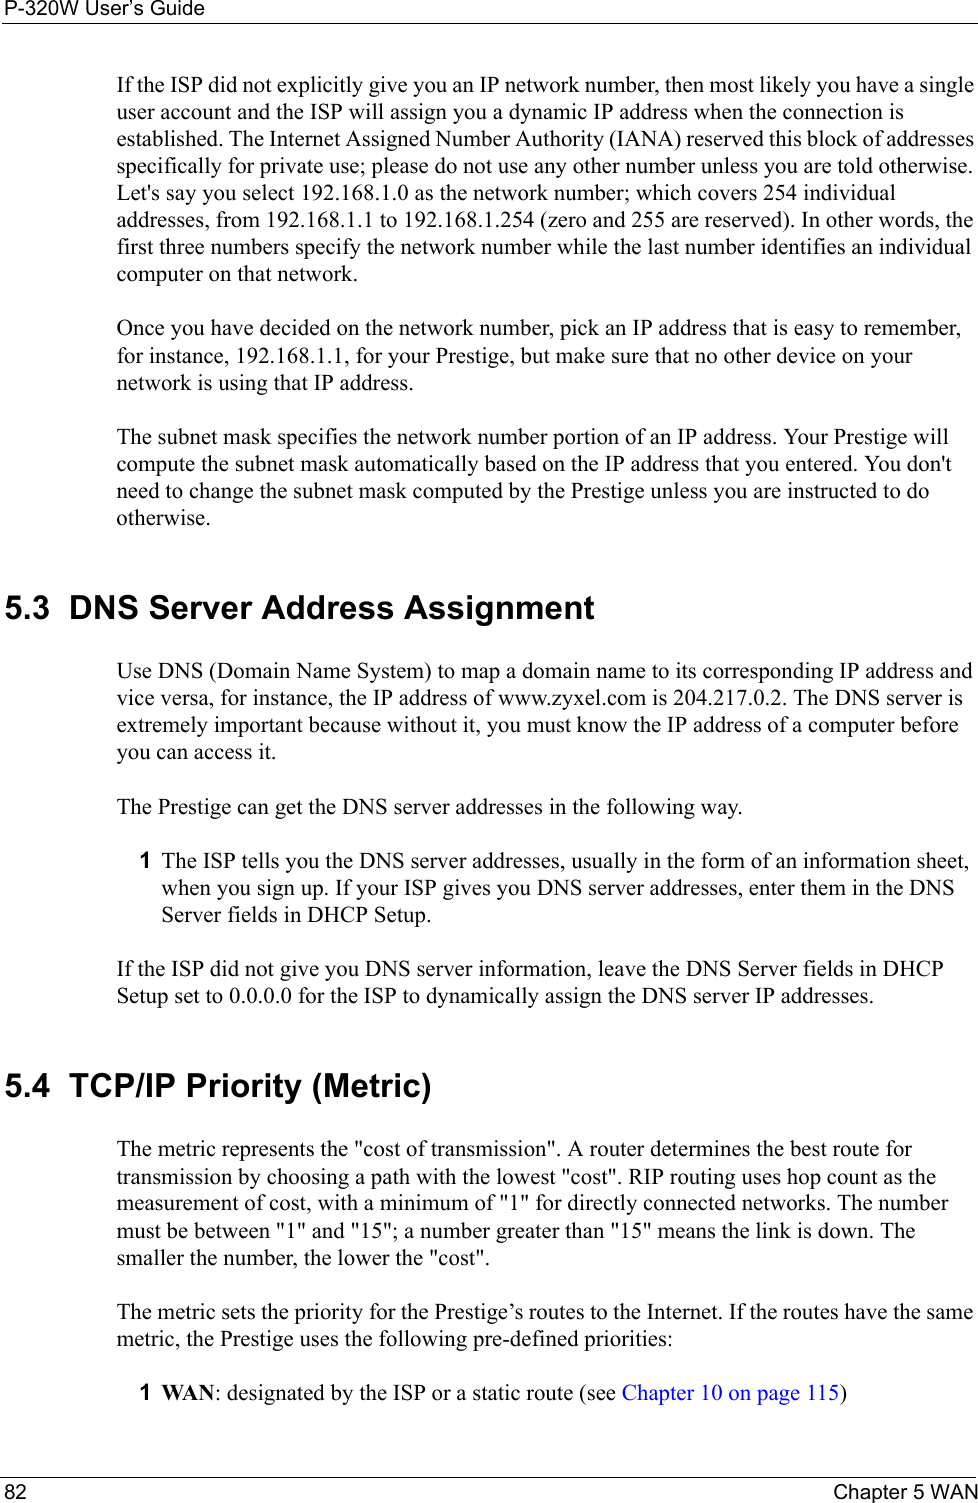 P-320W User’s Guide82  Chapter 5 WANIf the ISP did not explicitly give you an IP network number, then most likely you have a single user account and the ISP will assign you a dynamic IP address when the connection is established. The Internet Assigned Number Authority (IANA) reserved this block of addresses specifically for private use; please do not use any other number unless you are told otherwise. Let&apos;s say you select 192.168.1.0 as the network number; which covers 254 individual addresses, from 192.168.1.1 to 192.168.1.254 (zero and 255 are reserved). In other words, the first three numbers specify the network number while the last number identifies an individual computer on that network.Once you have decided on the network number, pick an IP address that is easy to remember, for instance, 192.168.1.1, for your Prestige, but make sure that no other device on your network is using that IP address.The subnet mask specifies the network number portion of an IP address. Your Prestige will compute the subnet mask automatically based on the IP address that you entered. You don&apos;t need to change the subnet mask computed by the Prestige unless you are instructed to do otherwise.5.3  DNS Server Address AssignmentUse DNS (Domain Name System) to map a domain name to its corresponding IP address and vice versa, for instance, the IP address of www.zyxel.com is 204.217.0.2. The DNS server is extremely important because without it, you must know the IP address of a computer before you can access it. The Prestige can get the DNS server addresses in the following way.1The ISP tells you the DNS server addresses, usually in the form of an information sheet, when you sign up. If your ISP gives you DNS server addresses, enter them in the DNS Server fields in DHCP Setup.If the ISP did not give you DNS server information, leave the DNS Server fields in DHCP Setup set to 0.0.0.0 for the ISP to dynamically assign the DNS server IP addresses.5.4  TCP/IP Priority (Metric)The metric represents the &quot;cost of transmission&quot;. A router determines the best route for transmission by choosing a path with the lowest &quot;cost&quot;. RIP routing uses hop count as the measurement of cost, with a minimum of &quot;1&quot; for directly connected networks. The number must be between &quot;1&quot; and &quot;15&quot;; a number greater than &quot;15&quot; means the link is down. The smaller the number, the lower the &quot;cost&quot;.The metric sets the priority for the Prestige’s routes to the Internet. If the routes have the same metric, the Prestige uses the following pre-defined priorities:1WAN: designated by the ISP or a static route (see Chapter 10 on page 115)